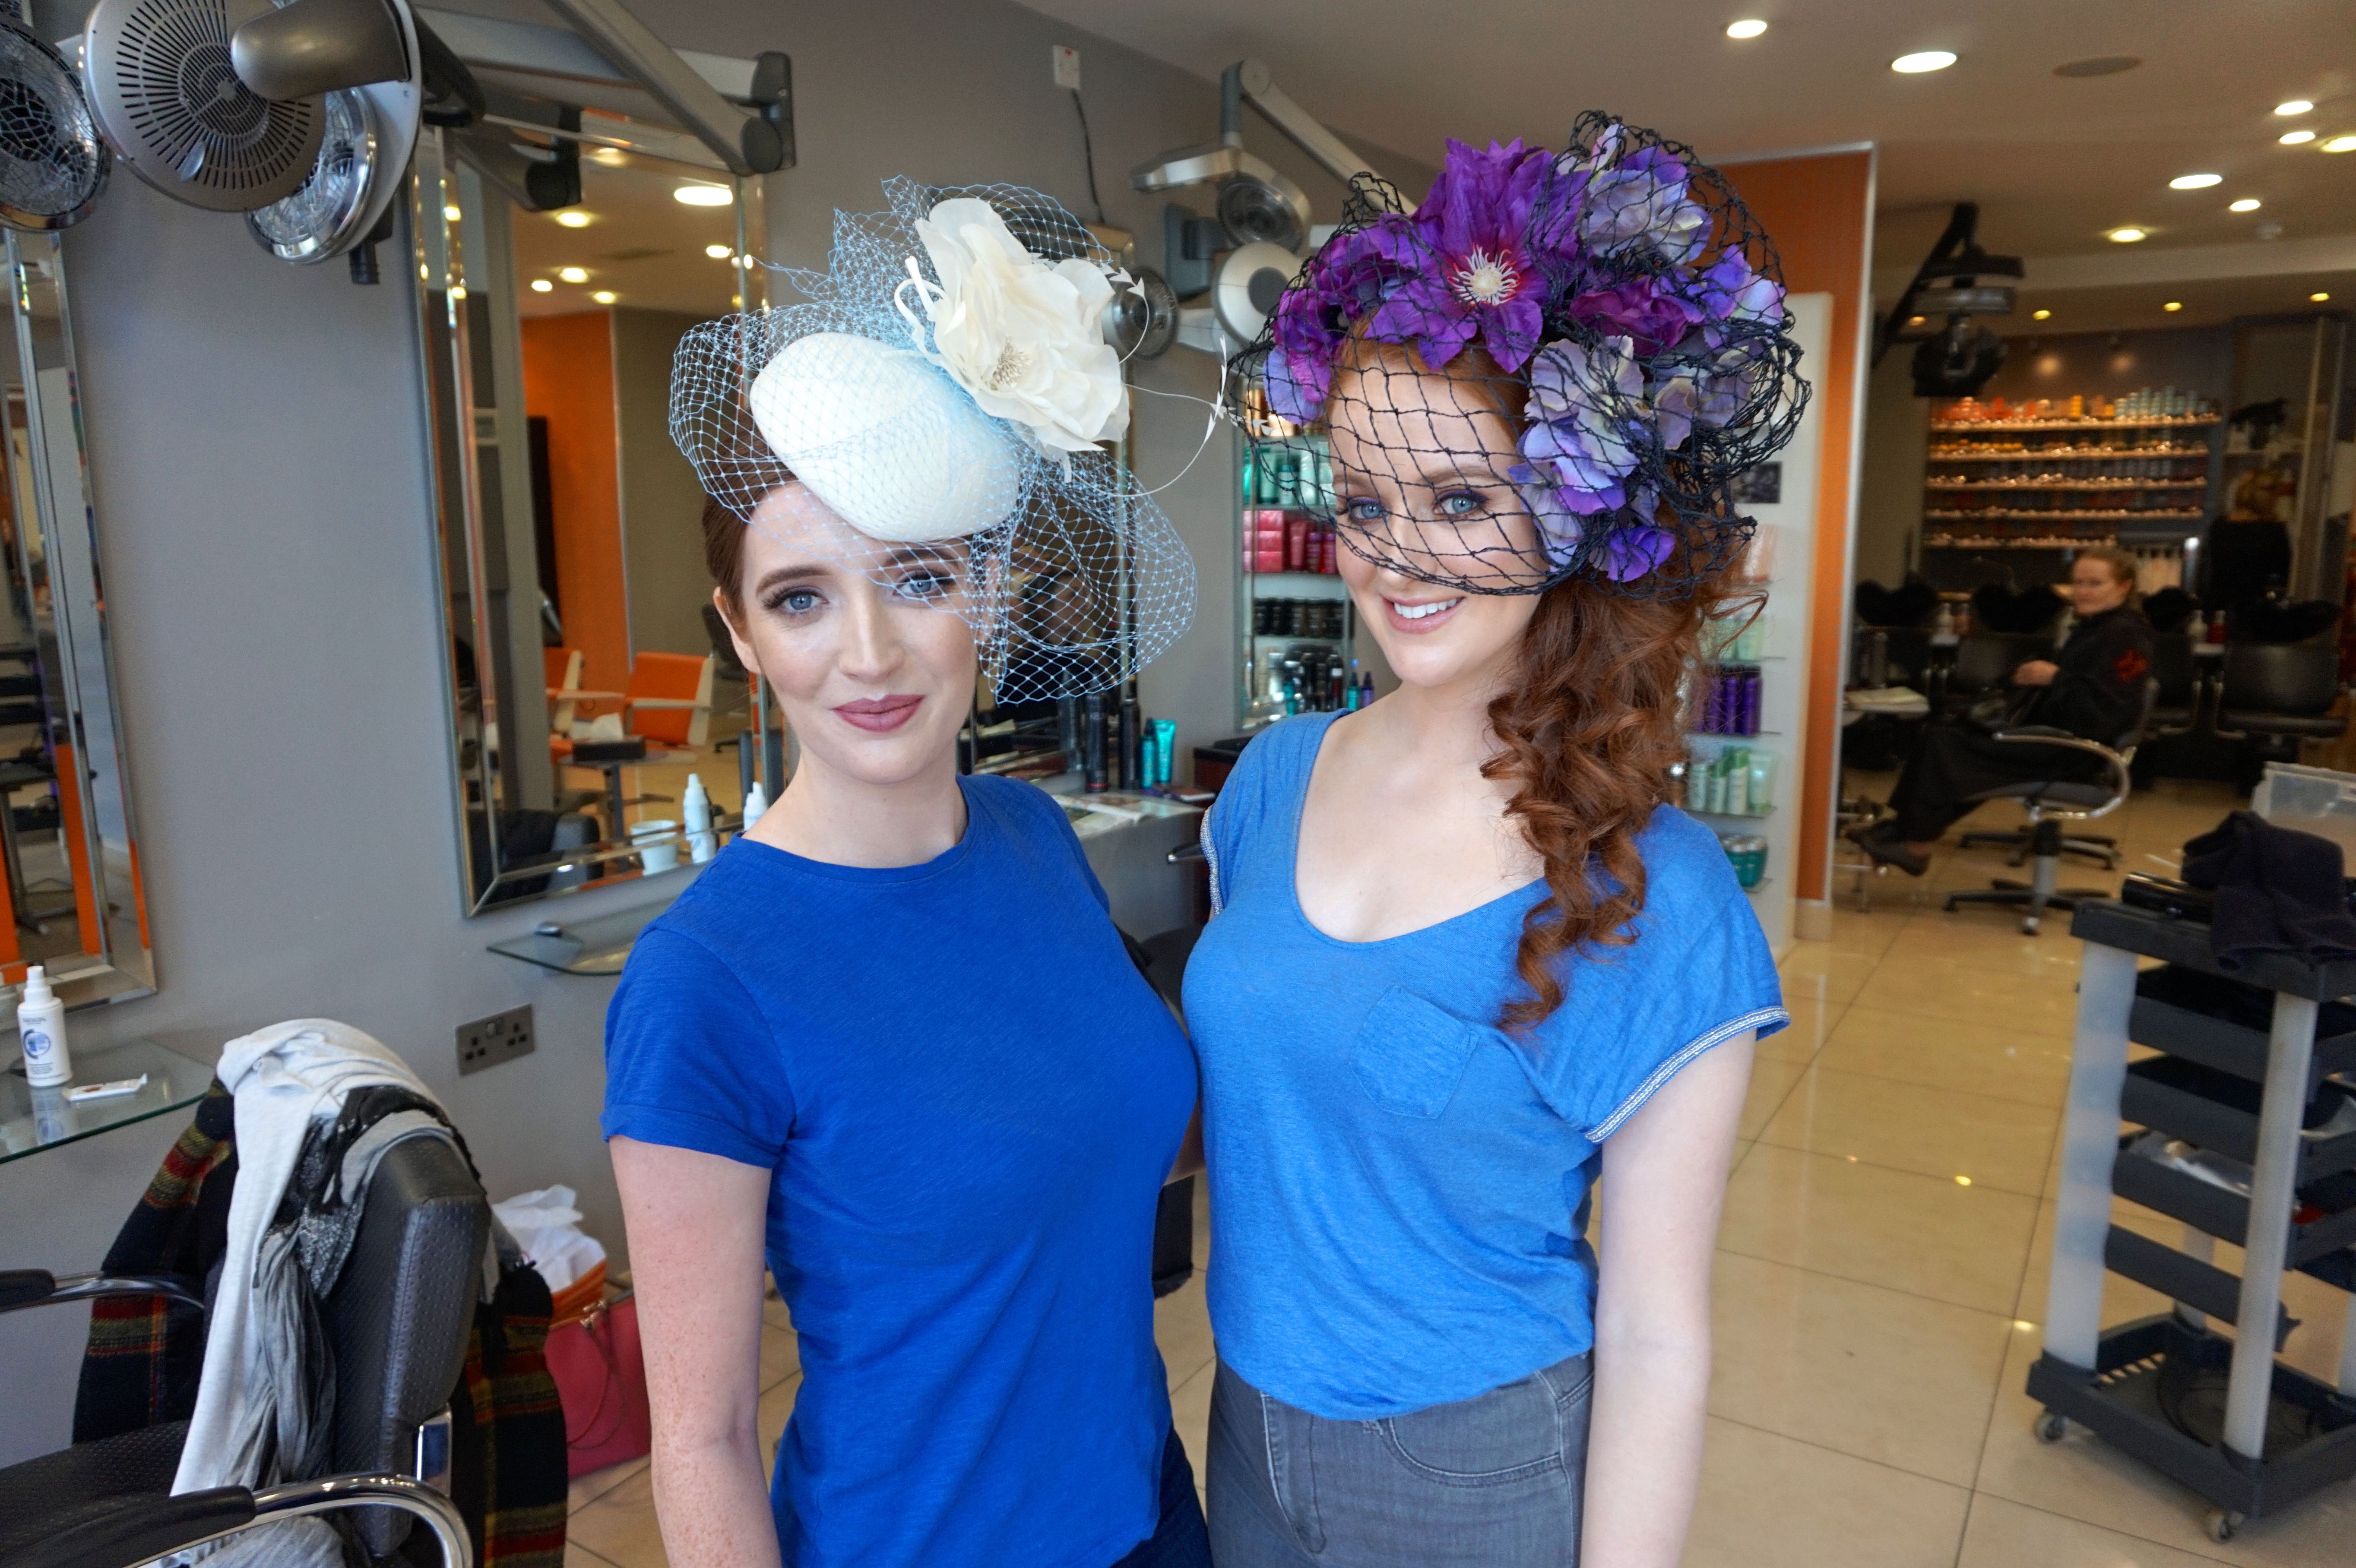 Get ready for the galway races Casserly sisters